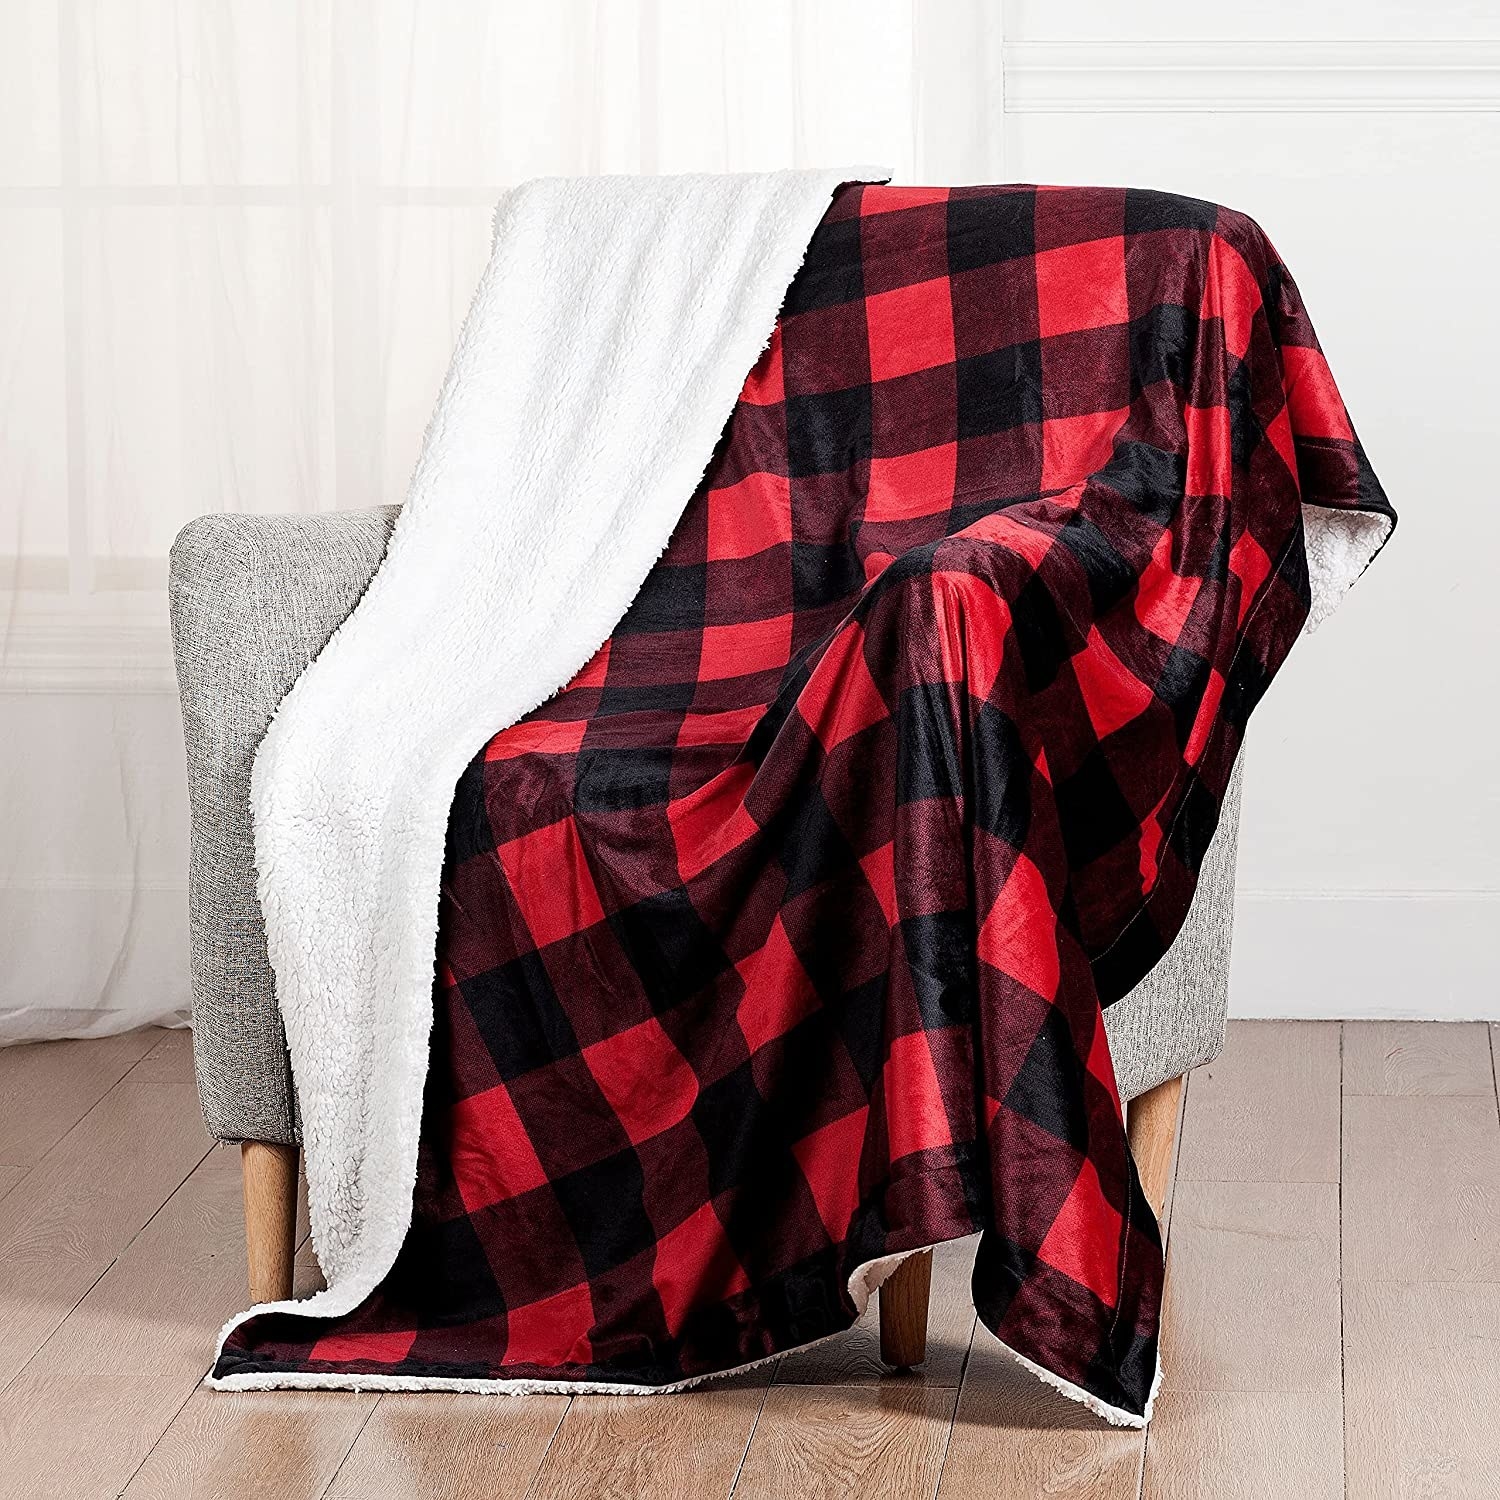 A knit blanket draped over a chair